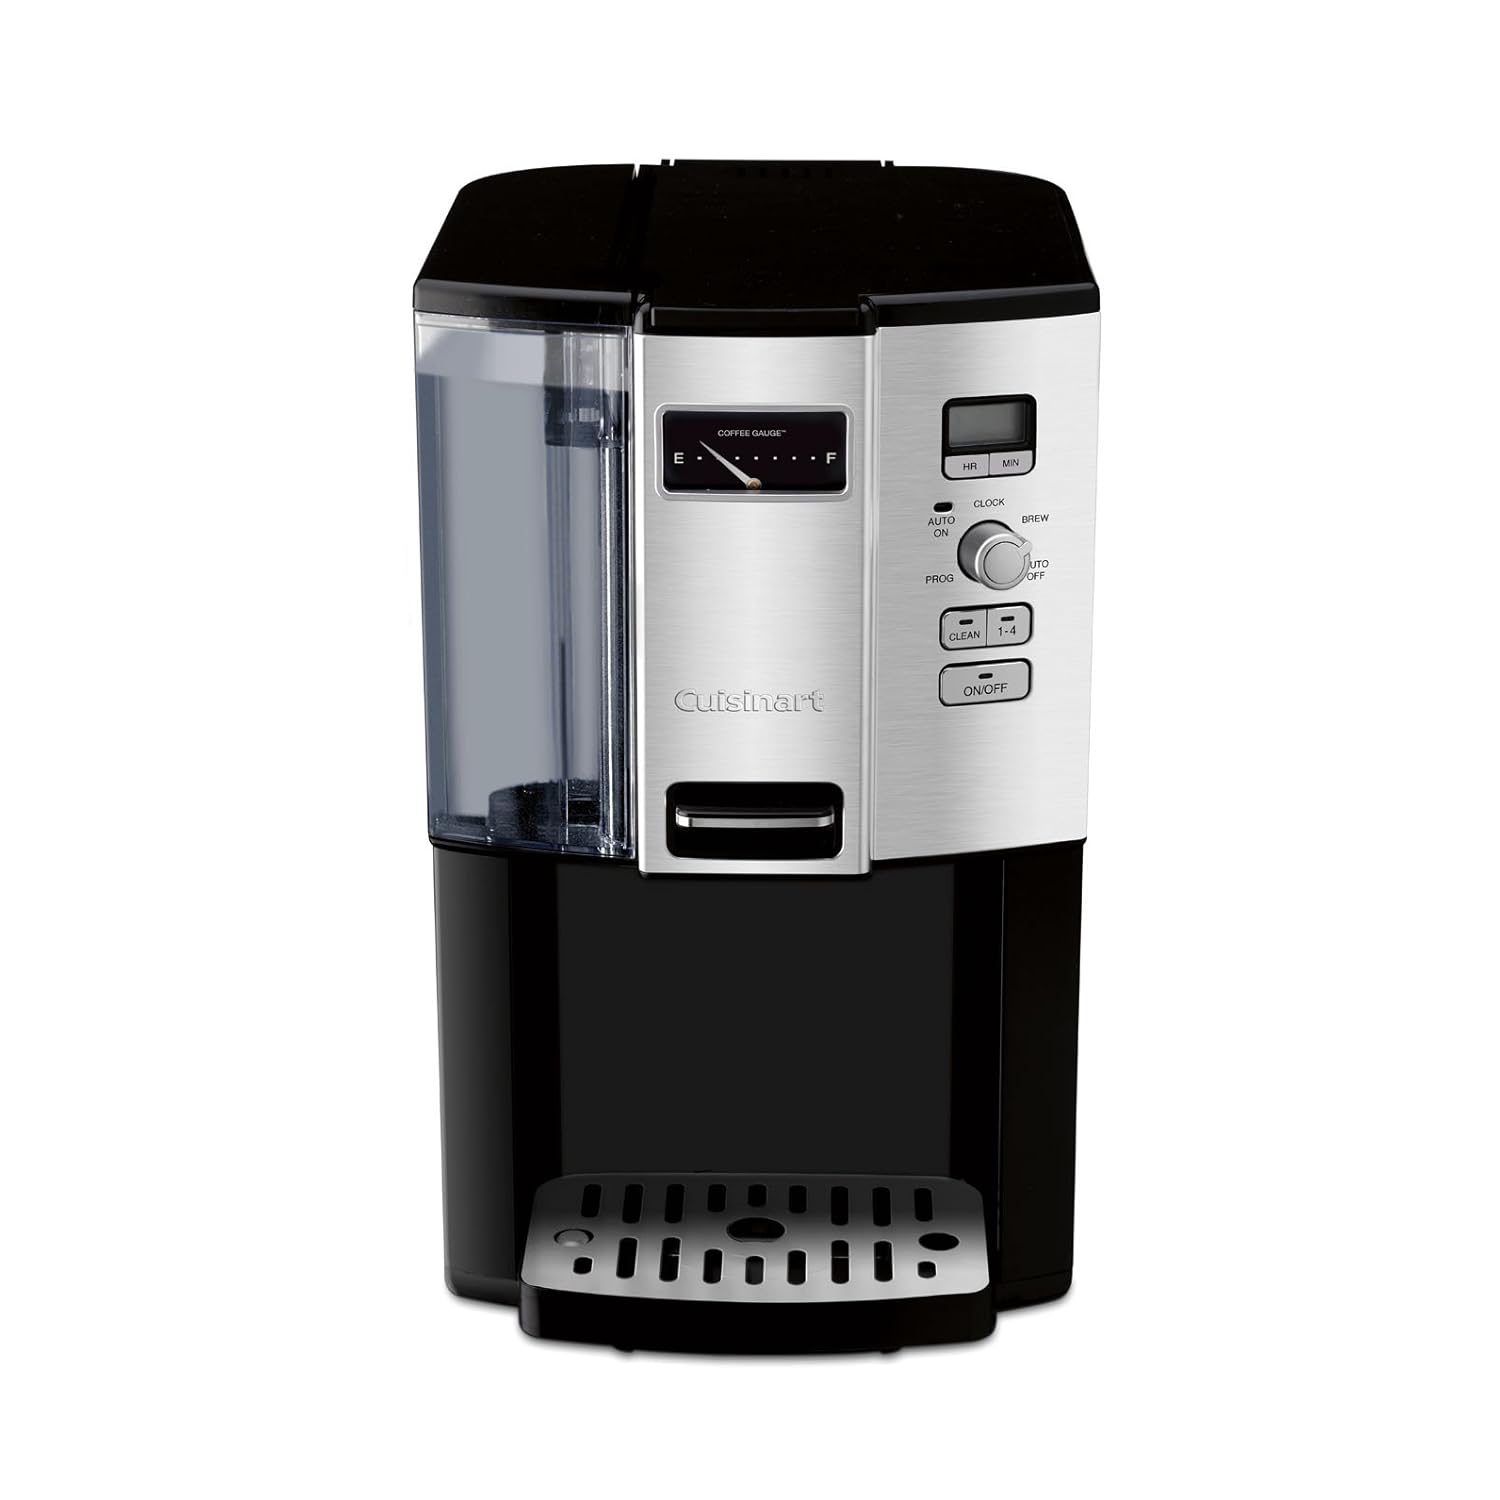 black decker spacemaker trade under cabinet 12 cup coffee maker from